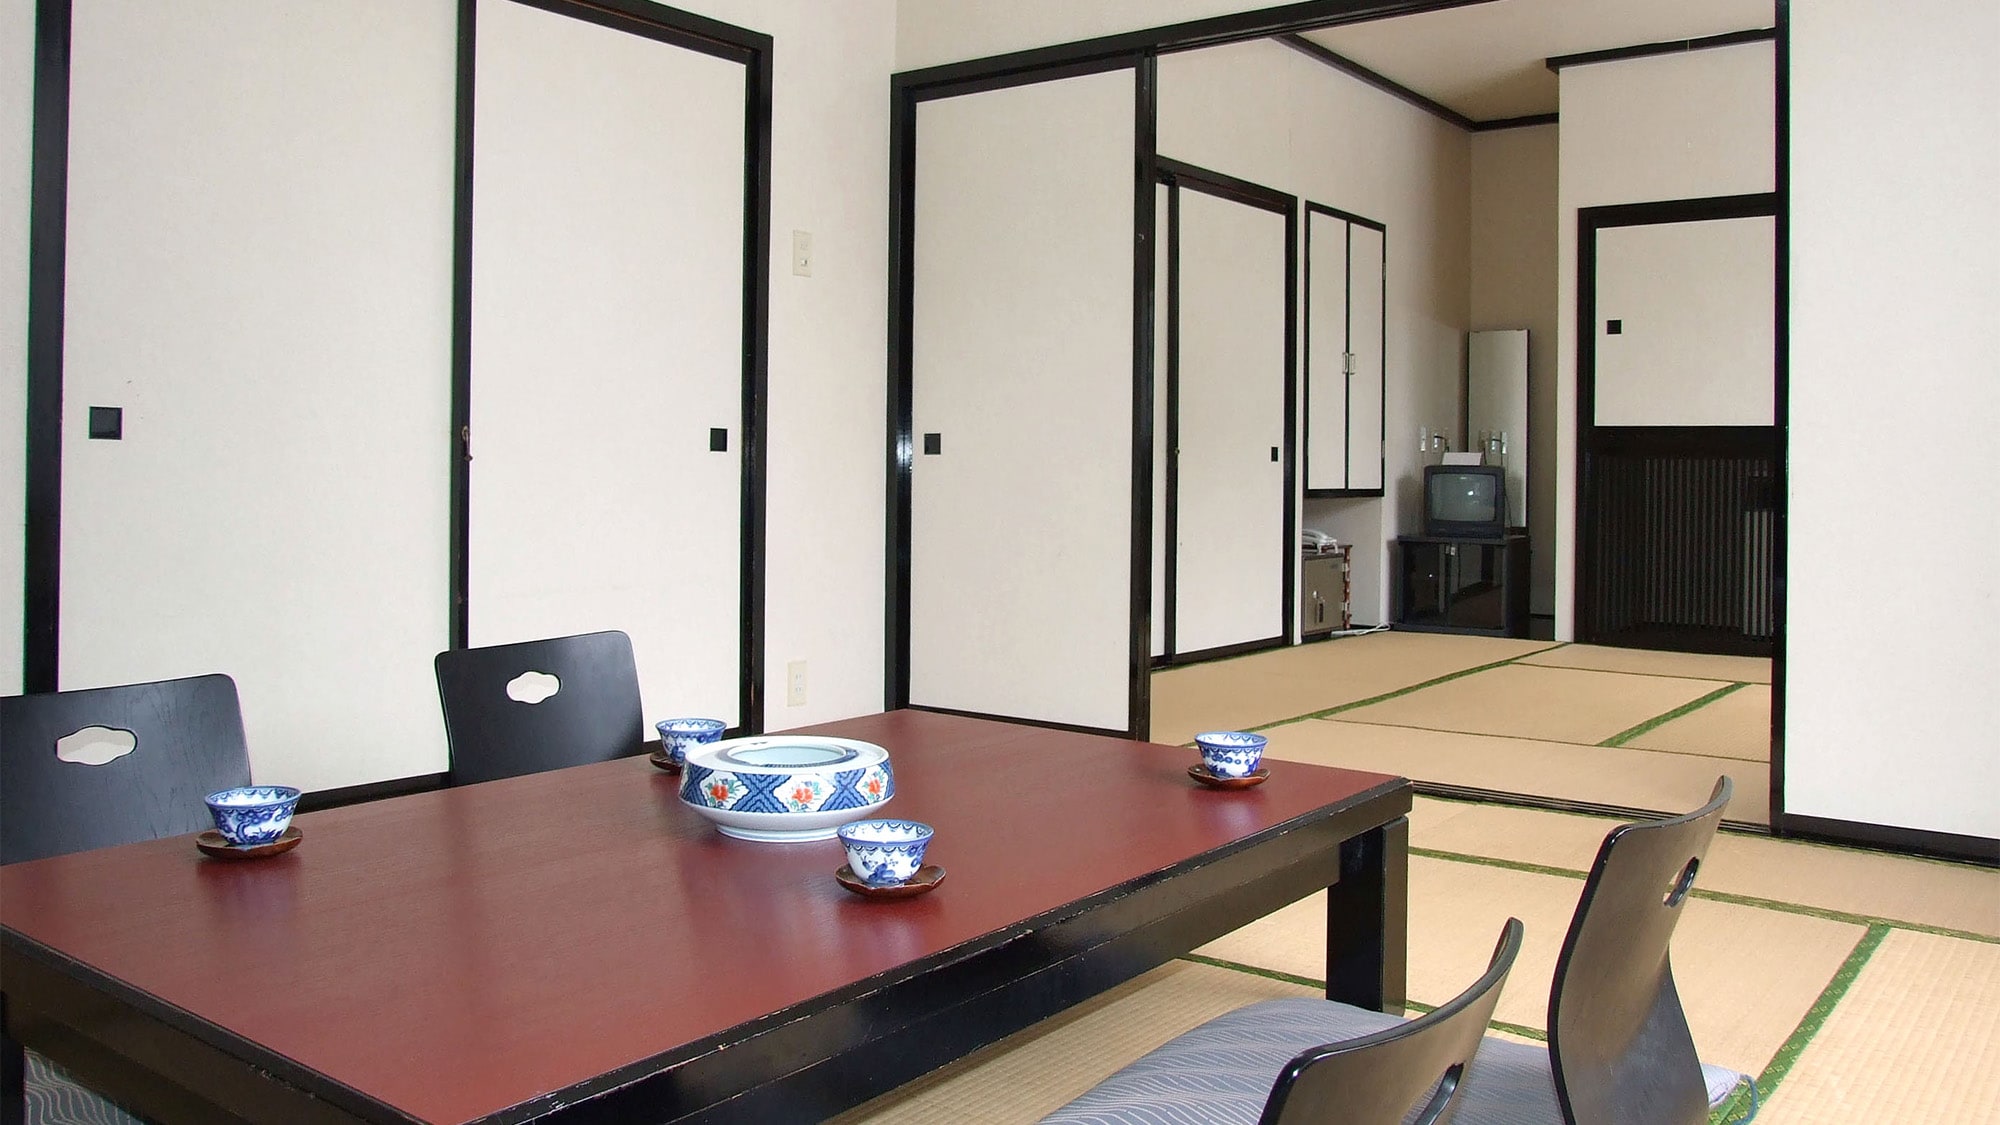 ・ [Example of Japanese-style room two rooms] A room with a veranda of 2.5 tatami mats on 8 tatami mats + 8 tatami mats